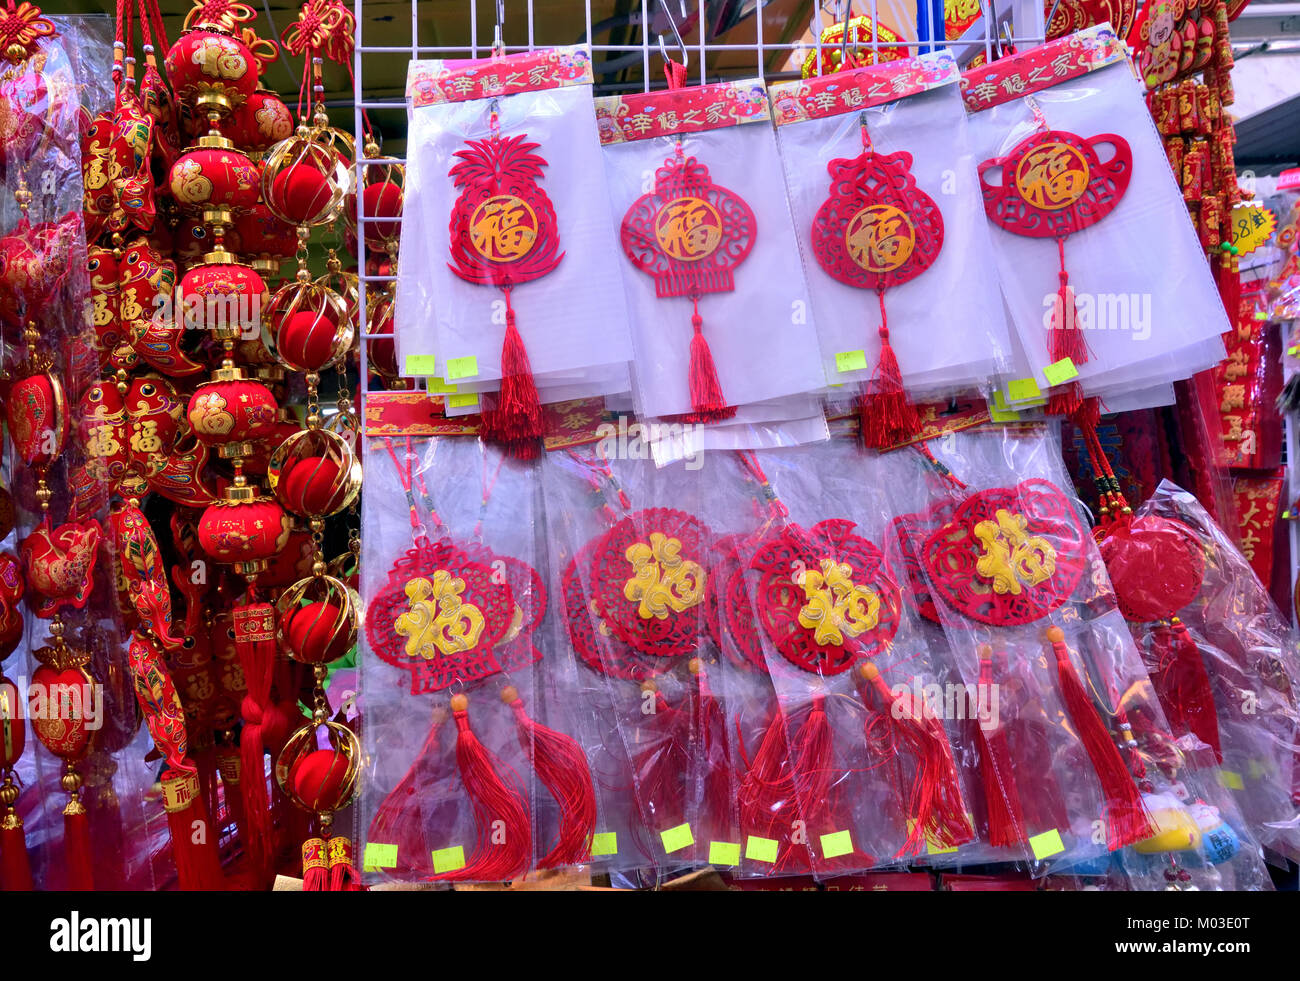 Chinese New Year decorative items for sale Stock Photo